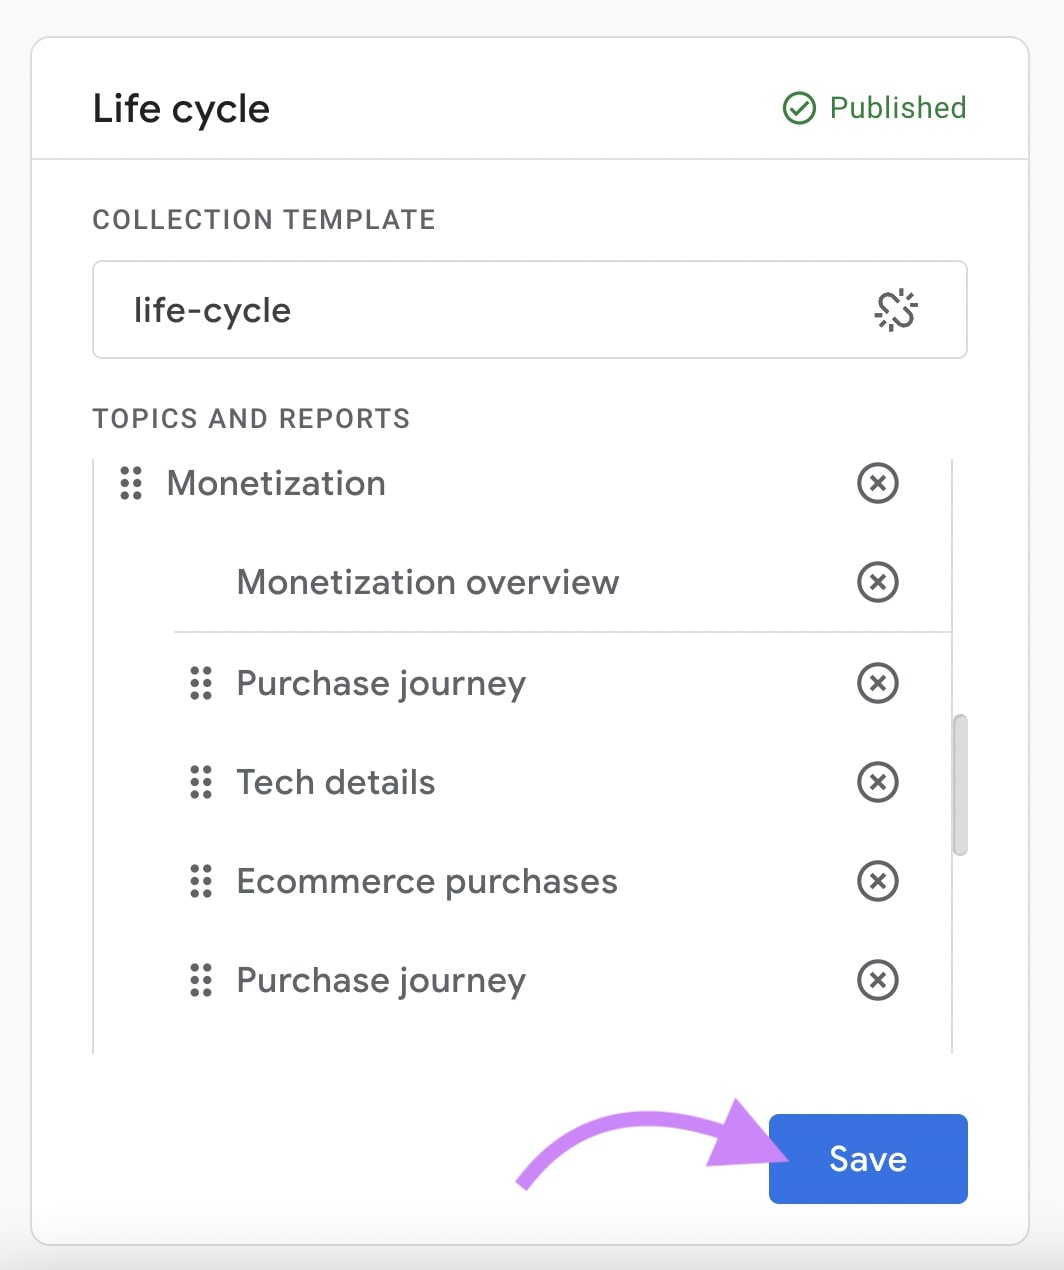 "Purchase journey" custom funnel added to “Monetization”